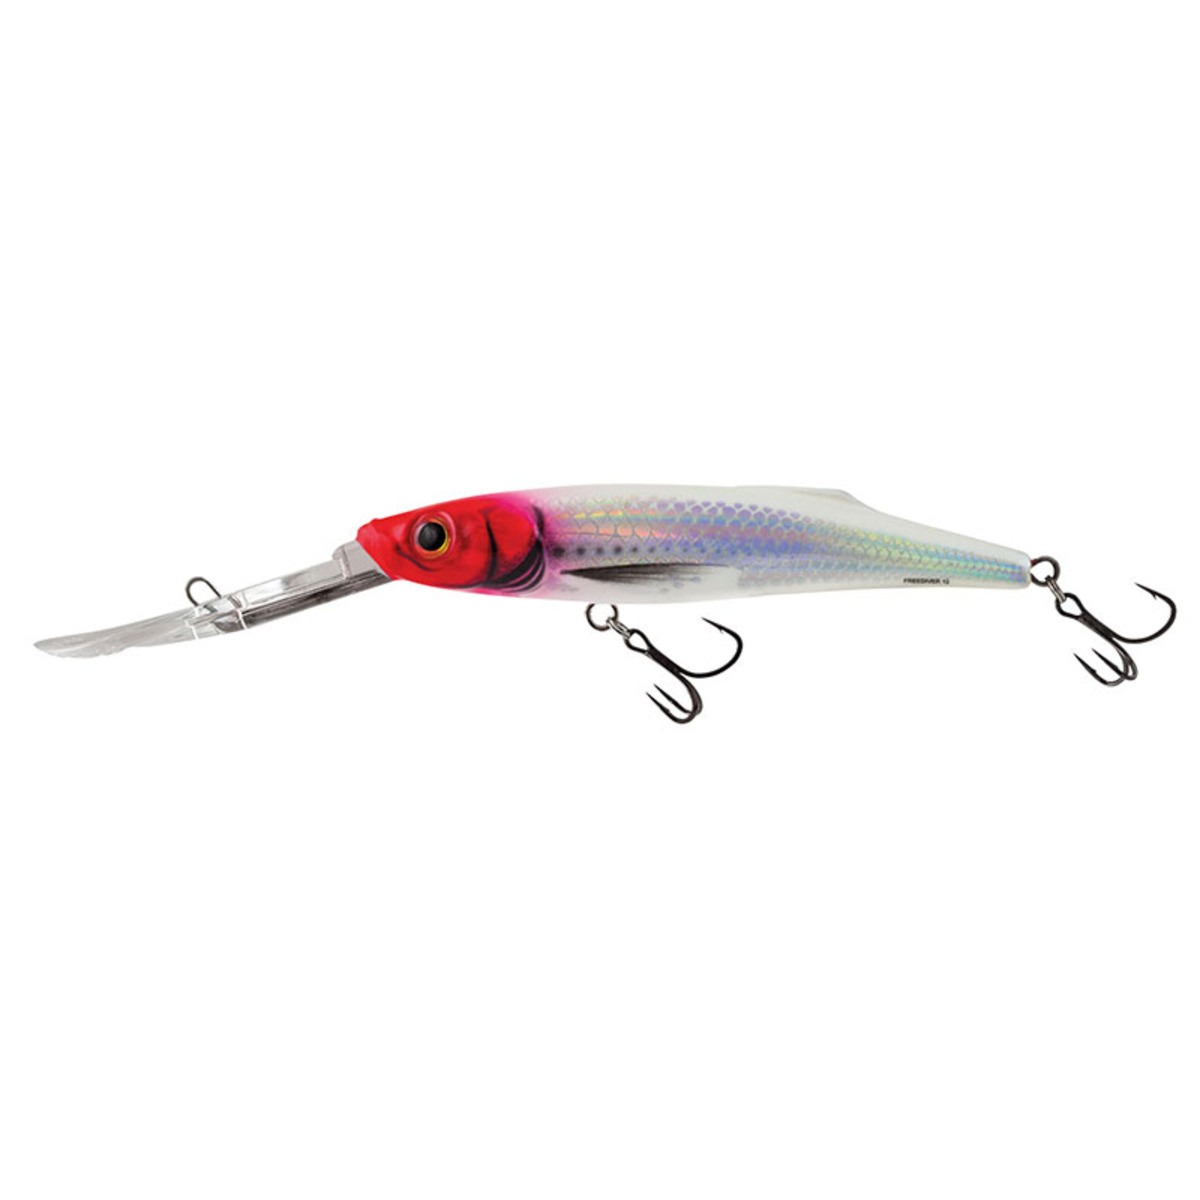 Salmo Freediver Super Deep Runner - 9 Cm - Holographic Red Head